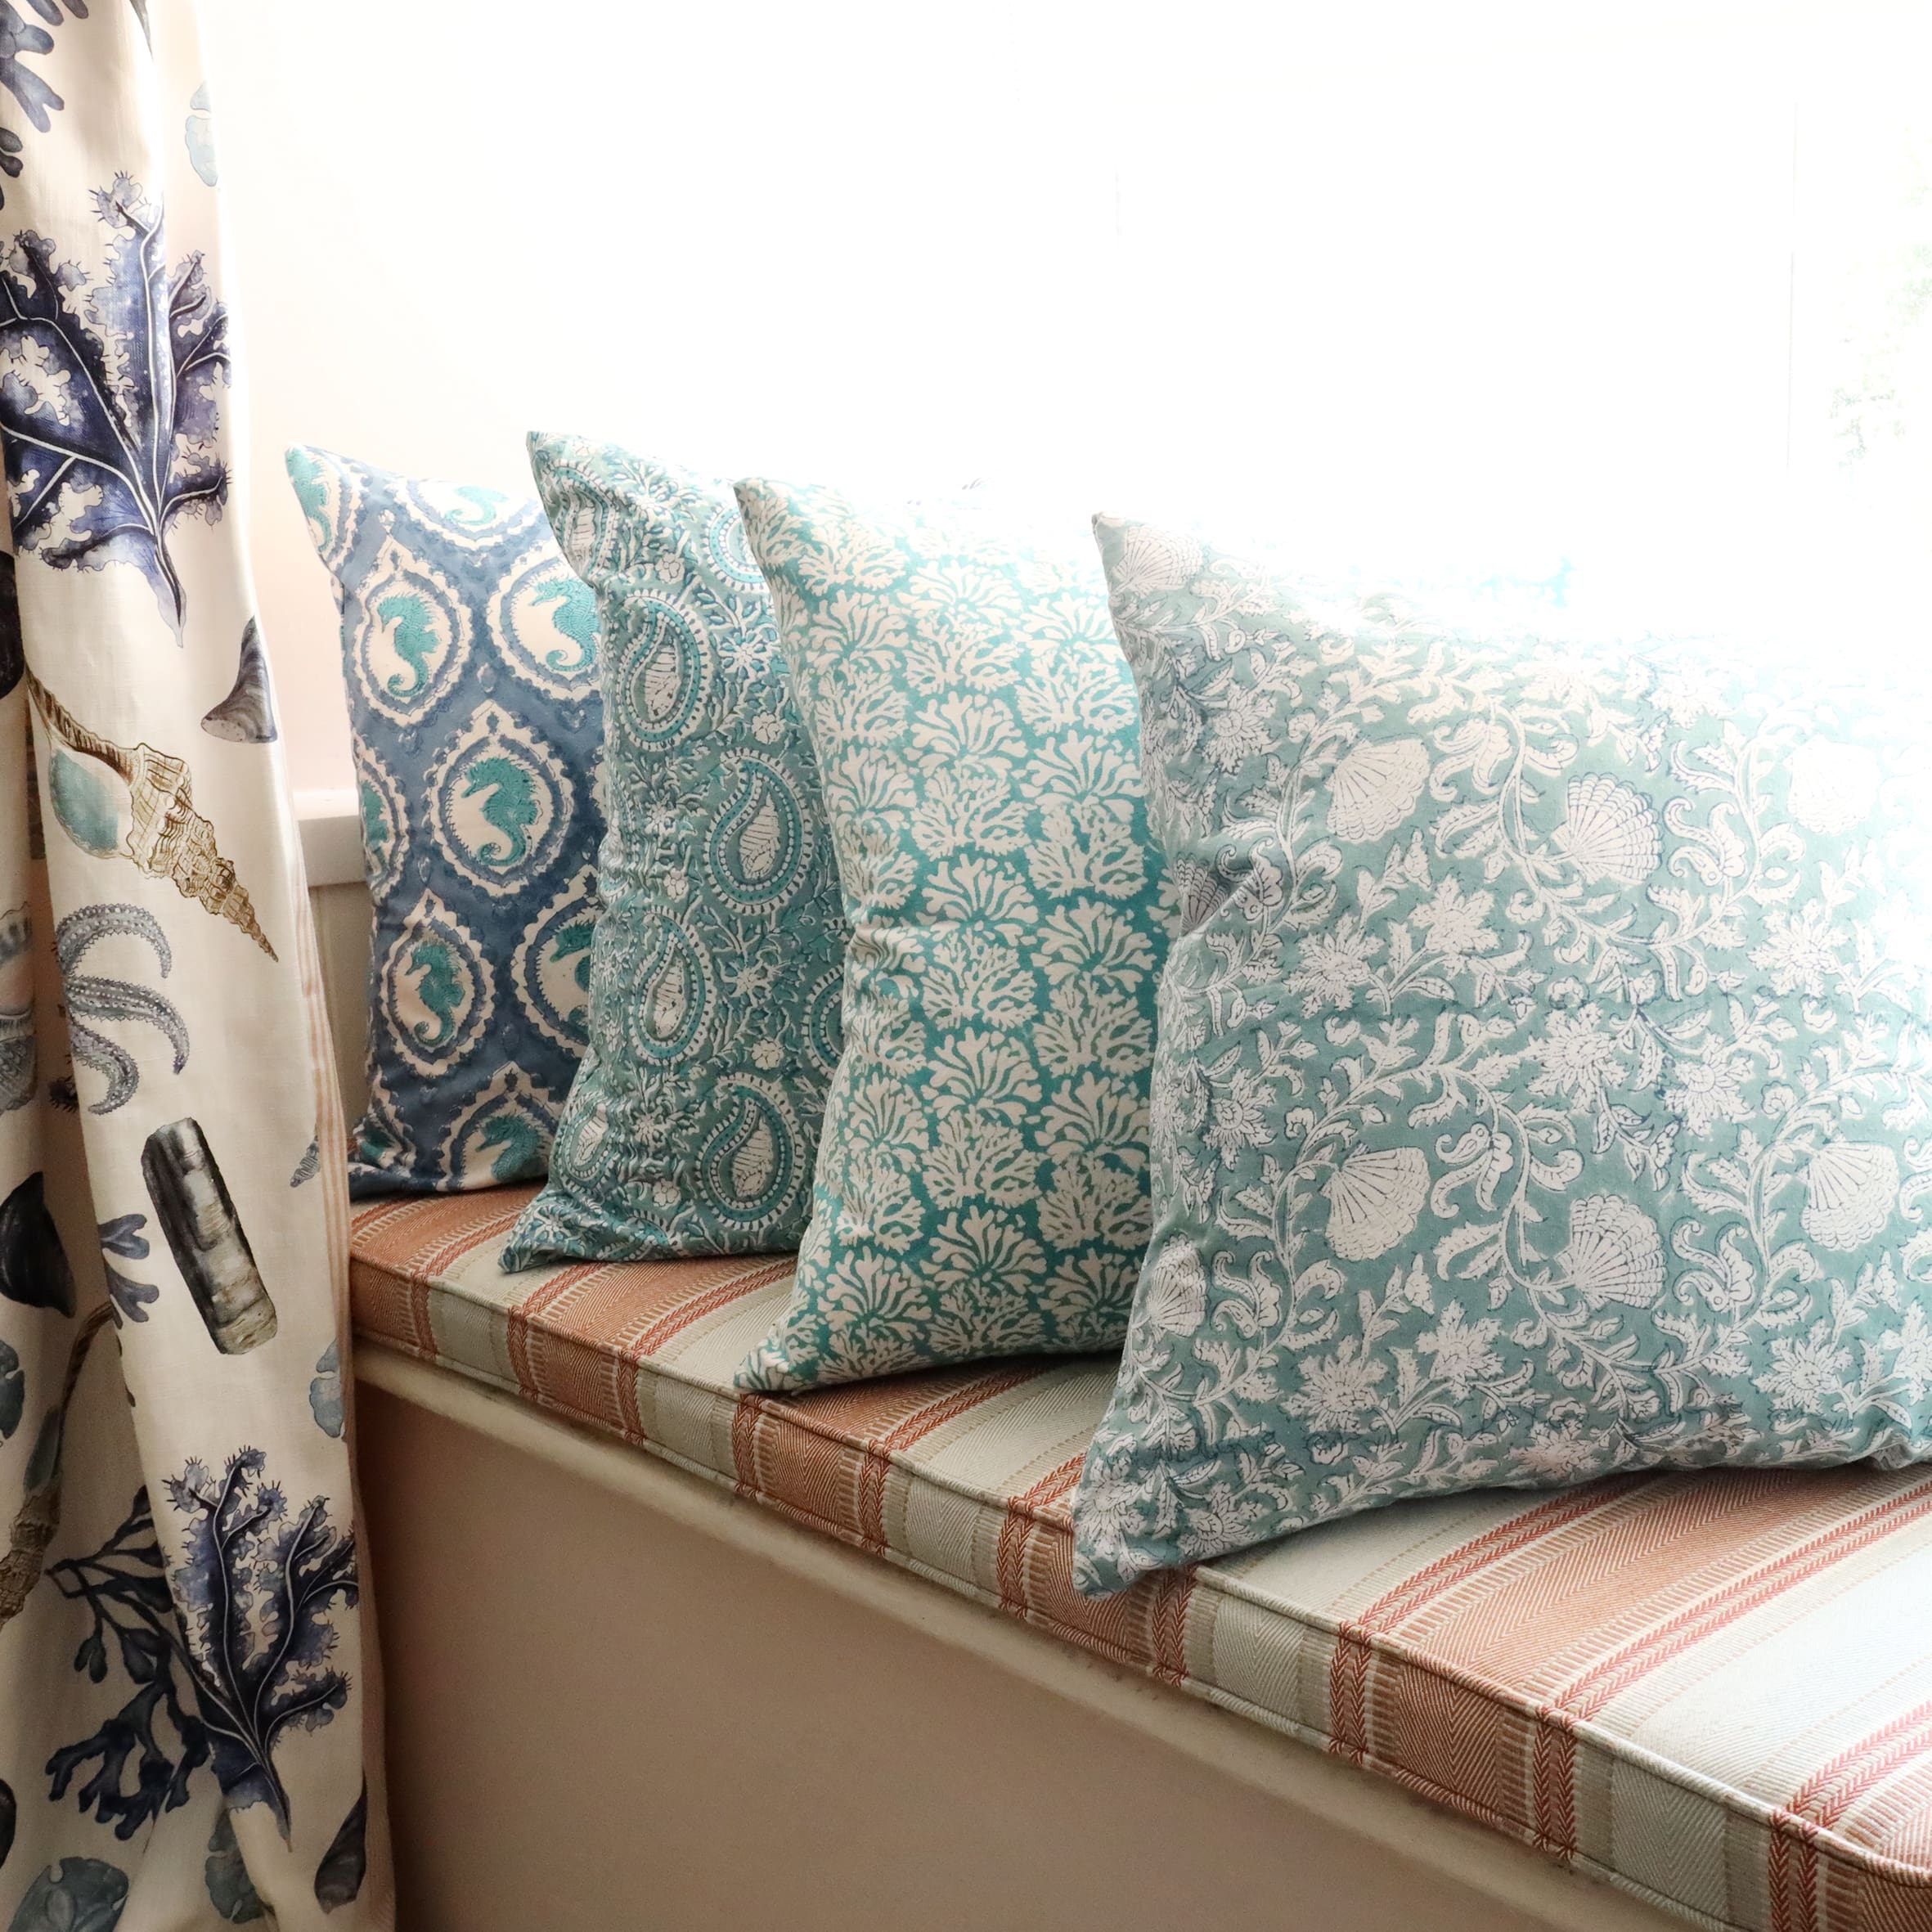 Sea Breeze Seashell Flower cushion which is Hand block printed fabric on a window seat.Also on the seat are other Hand block printed cushions,you can see the Rockpool Curtains to the side.